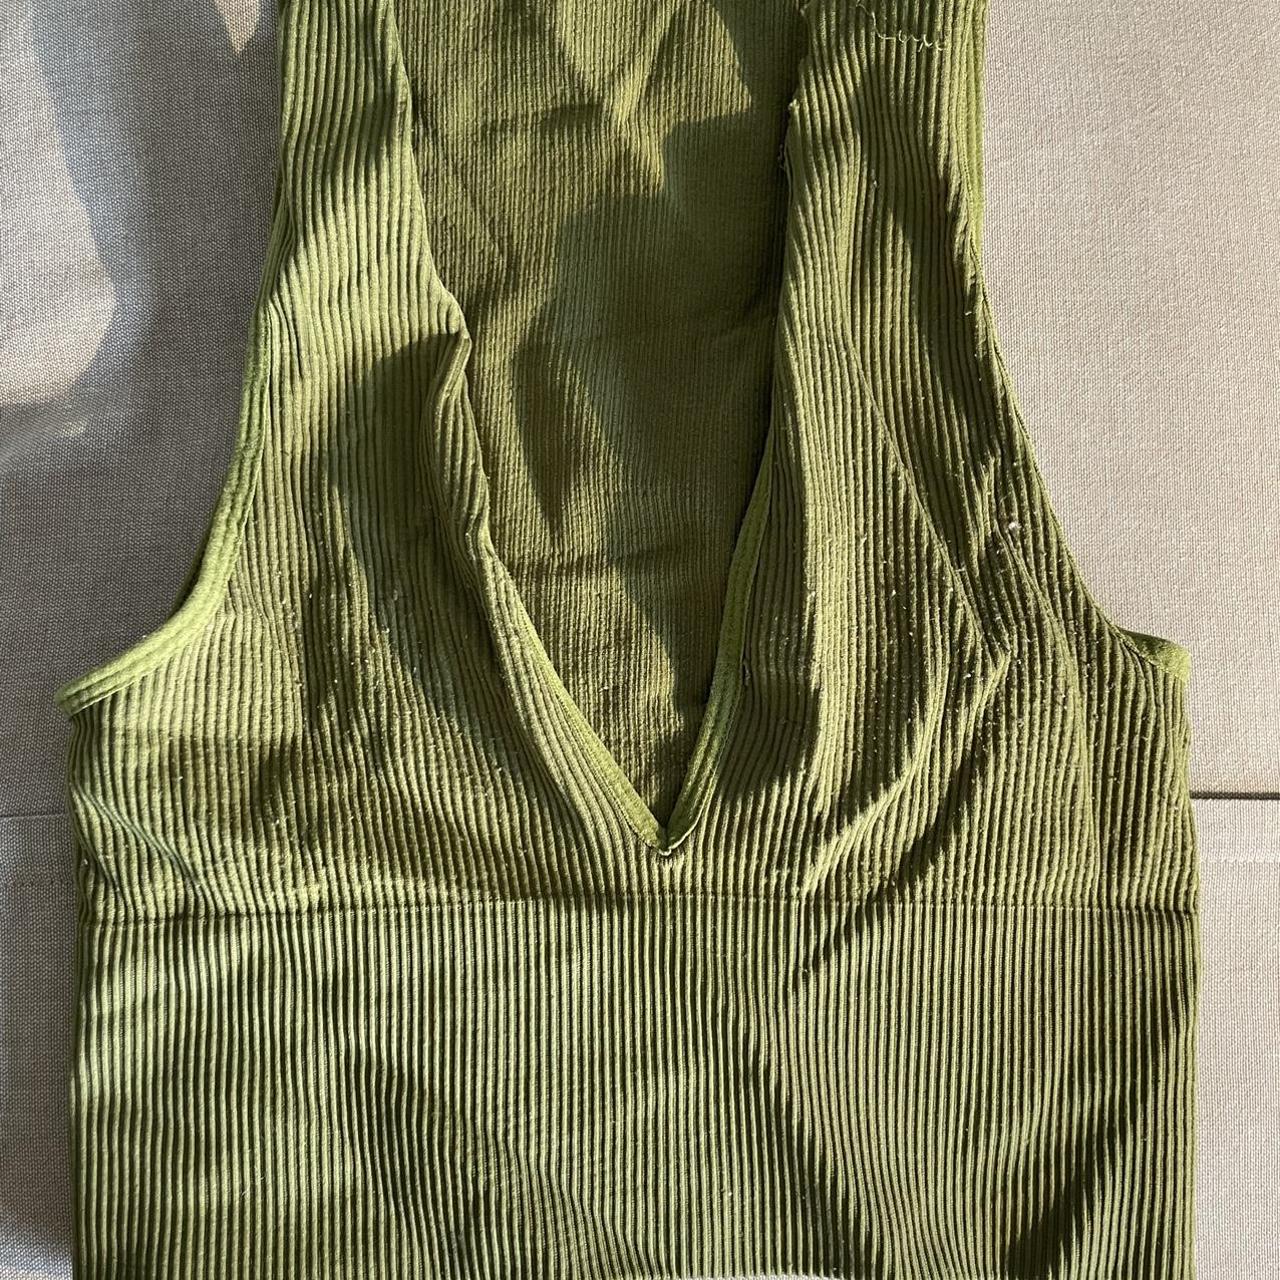 Olive green josie top. Perfect for clubbing,... - Depop